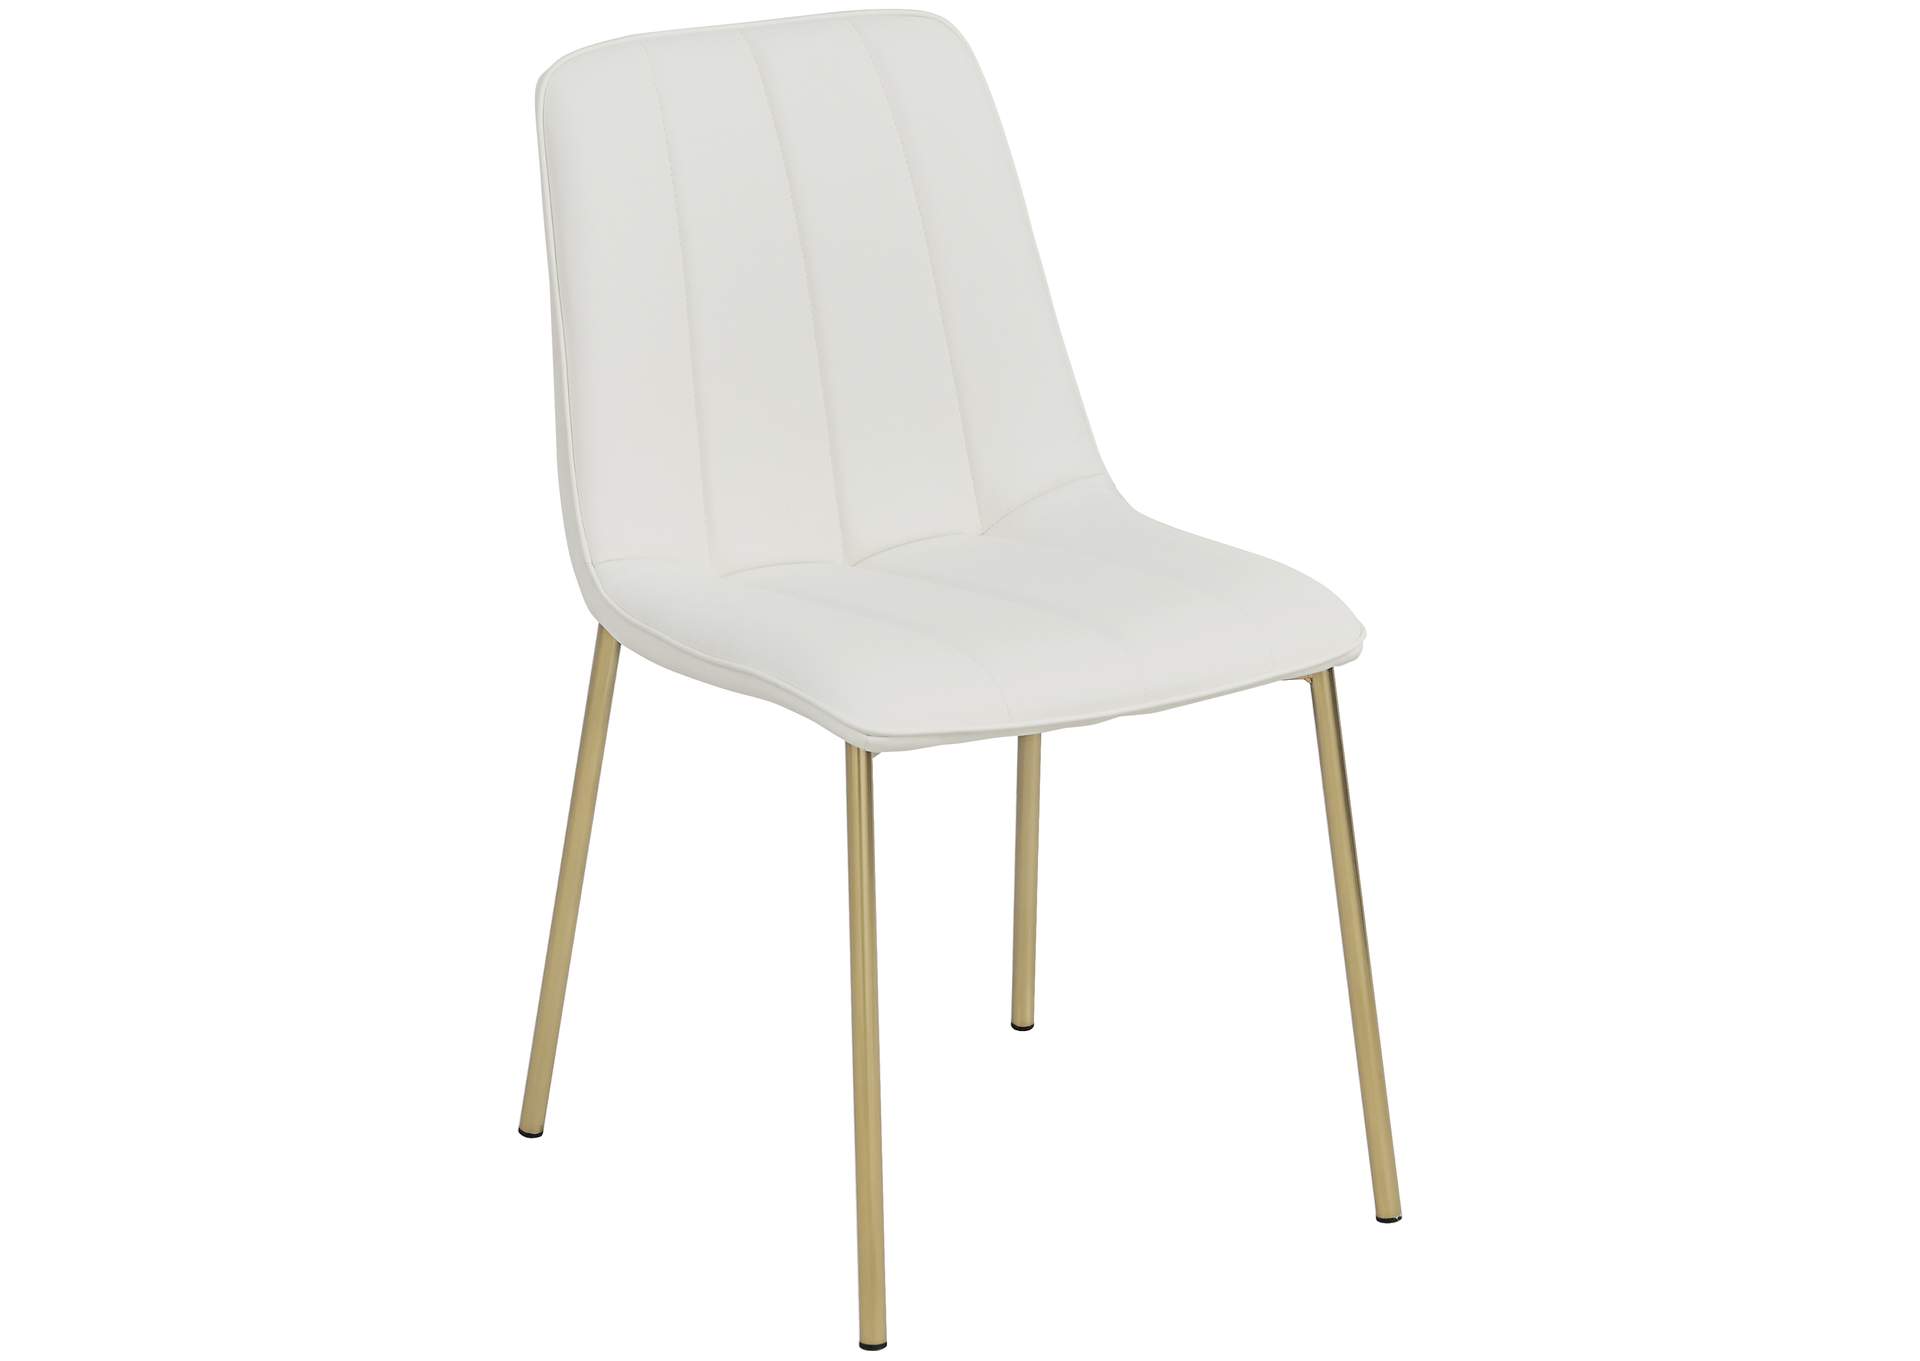 Isla White Faux Leather Dining Chair Set of 2,Meridian Furniture